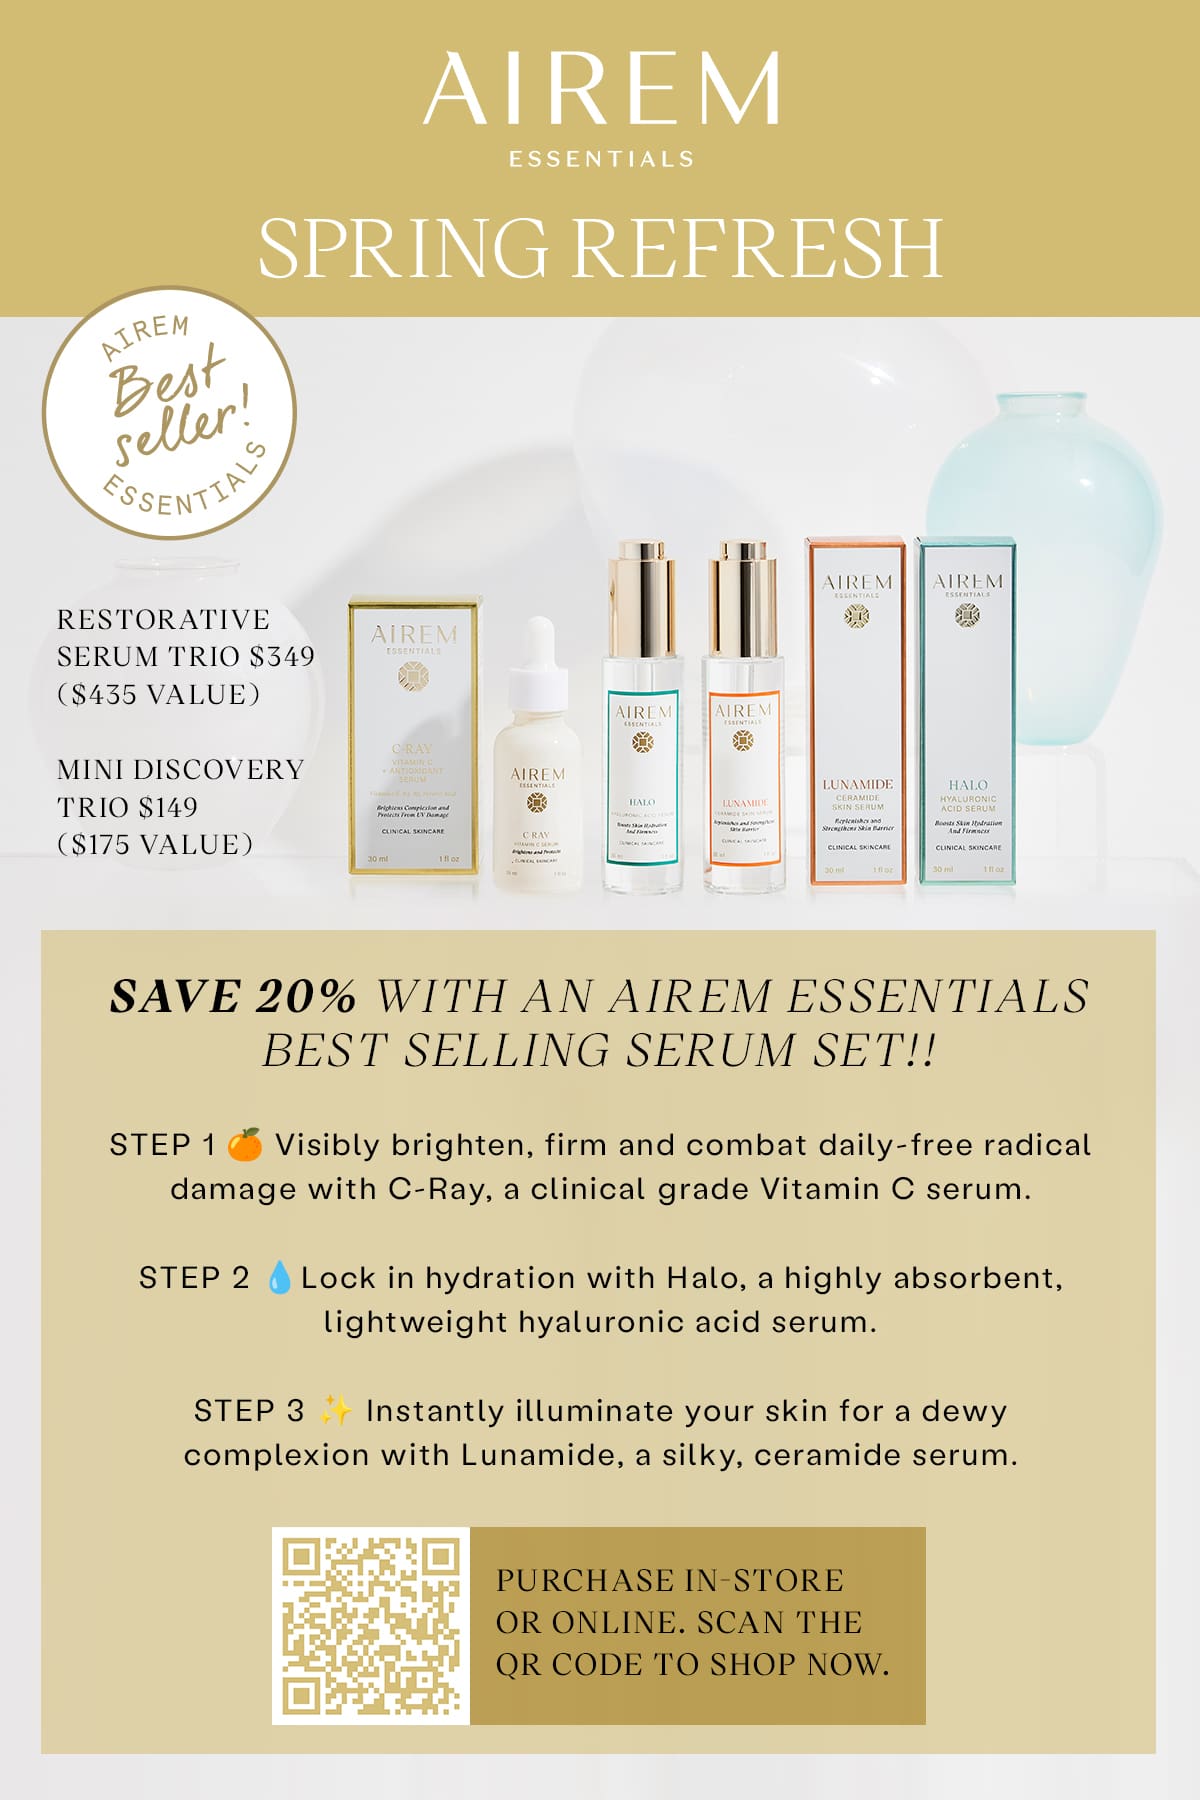 Save 20% with an AIREM Essentials Best Selling Serum Set